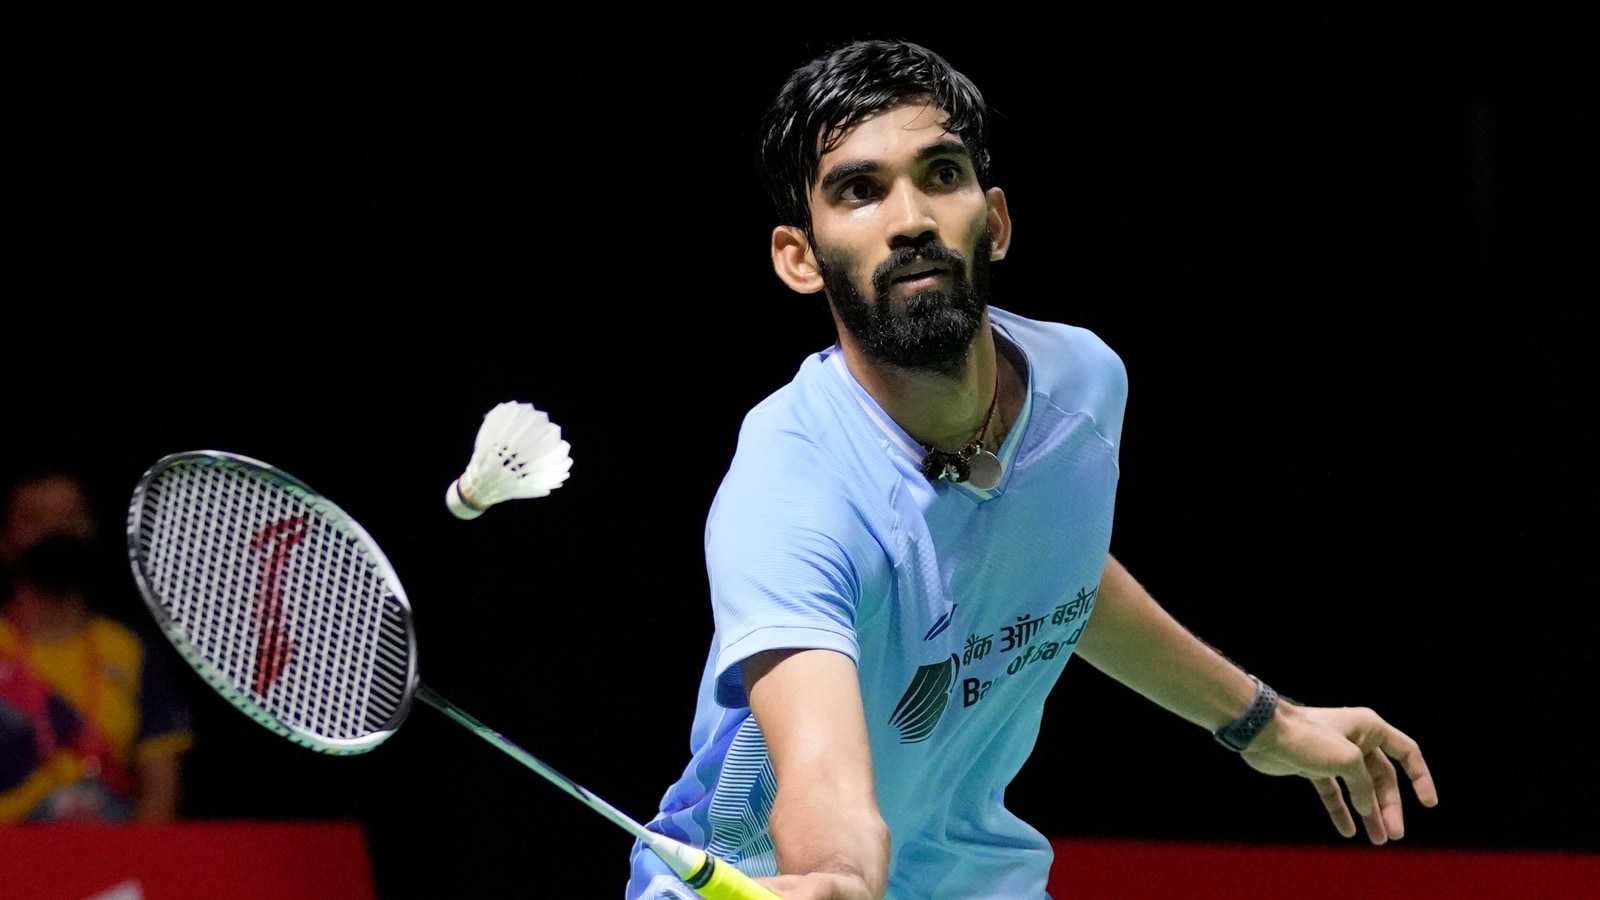 Srikanth crashes out in first round after losing to Axelsen